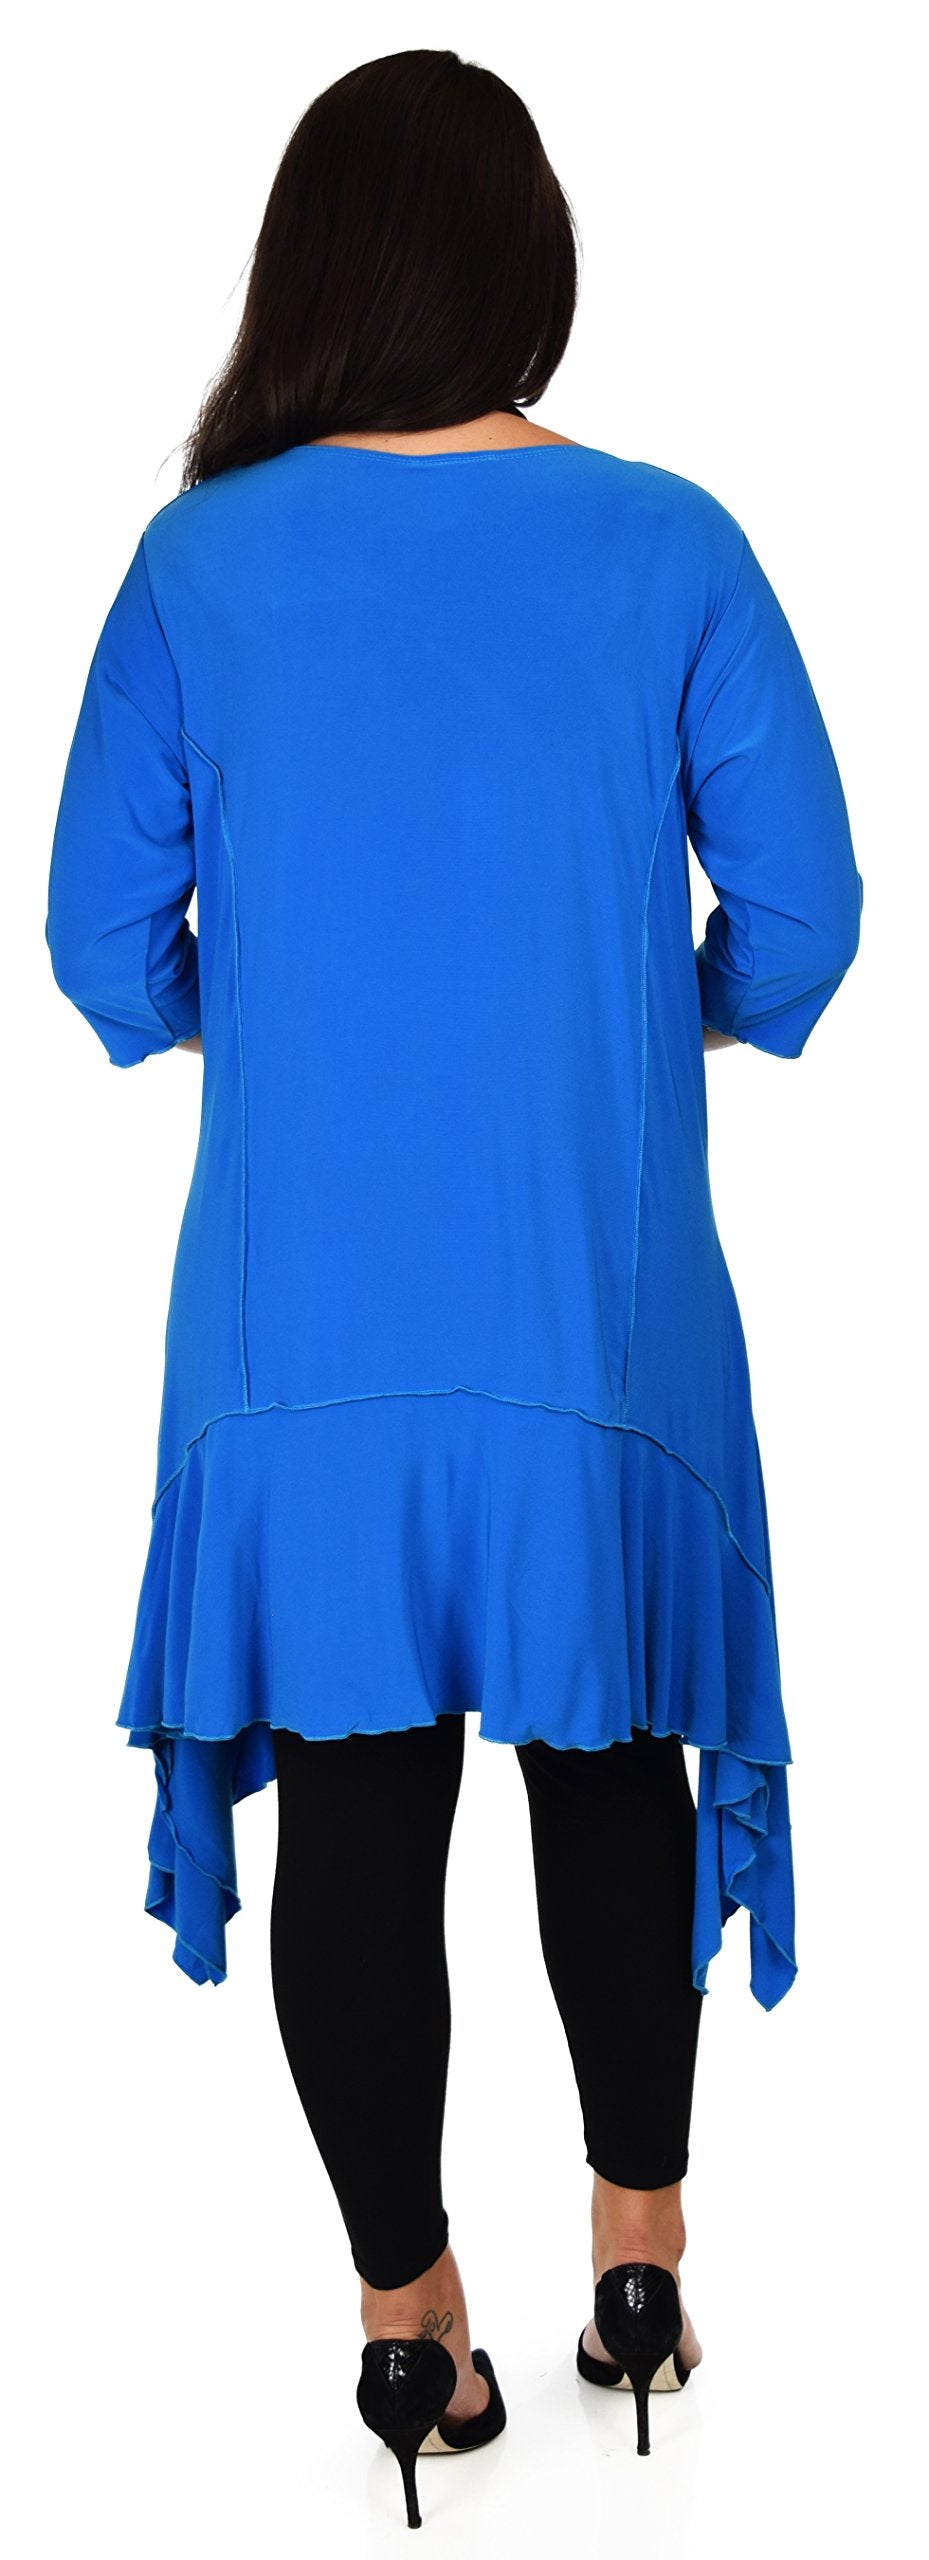 Stylish N Exclusive Crazy cuts Tunic,  Lagenlook Tunic dress, Plus Size Tunic, Quirky Tunic Dress. Plus size clothing